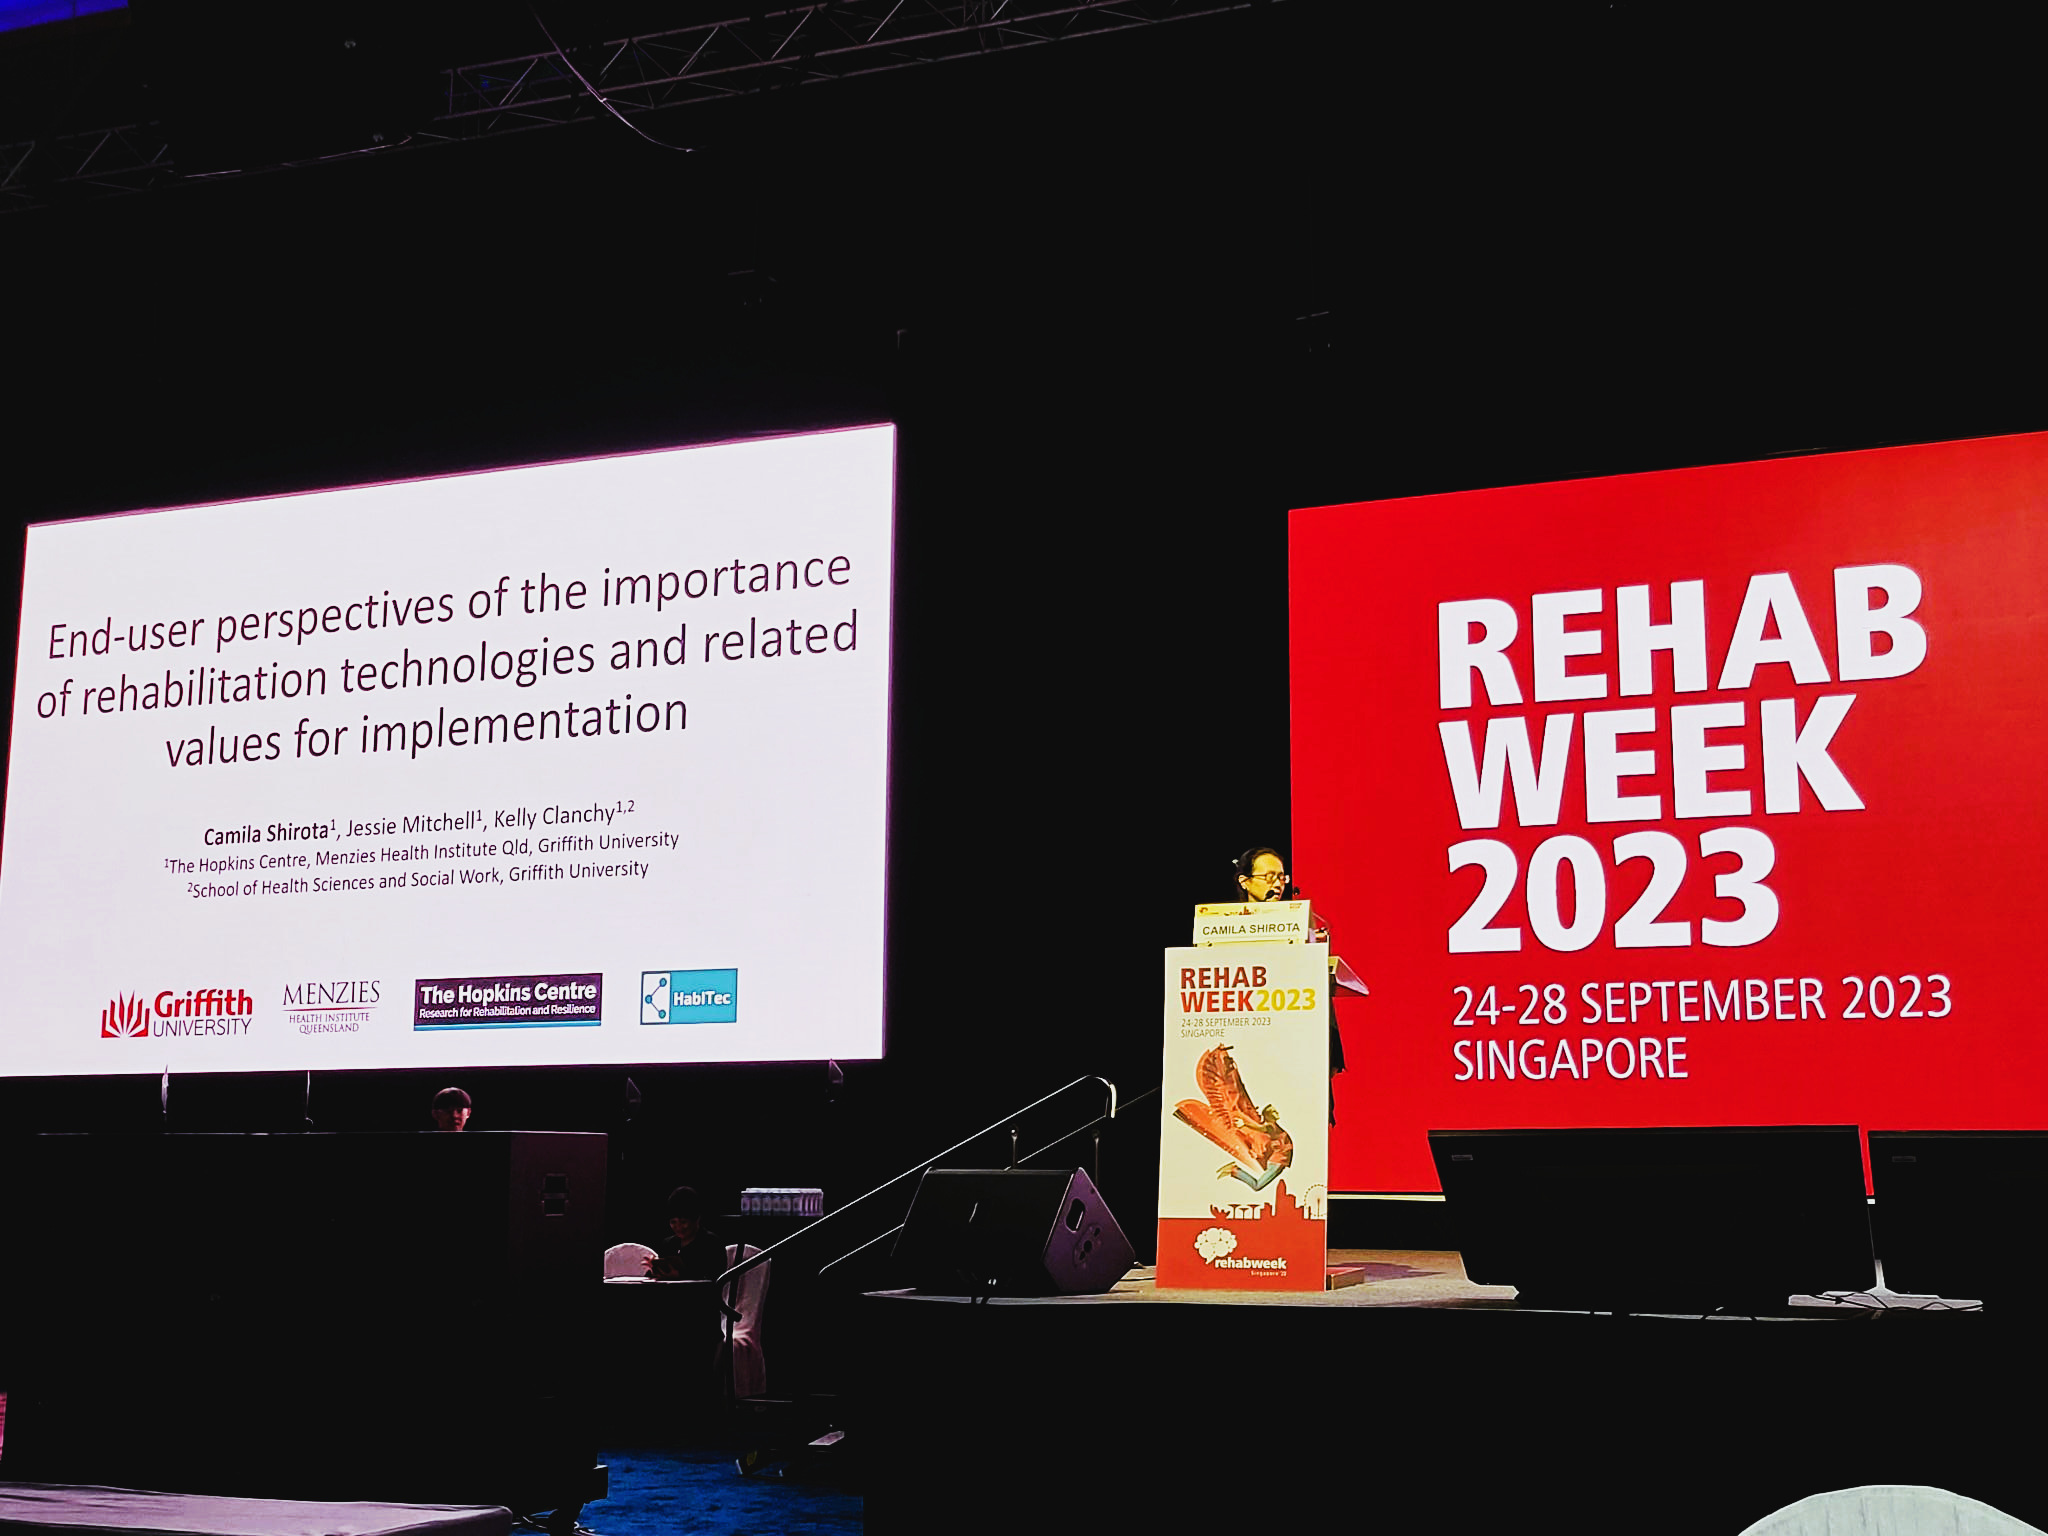 Camila Shirota stands behind a lectern on a large stage. On the front of the lectern is a rectangular poster and behind her is a large billboard, both with the words “REHAB WEEK 2023” written in bold. To Camila’s right hand side is a large screen showing the title slide from her presentation “End-user Perspectives of the Importance of Rehabilitation Technologies and Related Values for Implementation”  